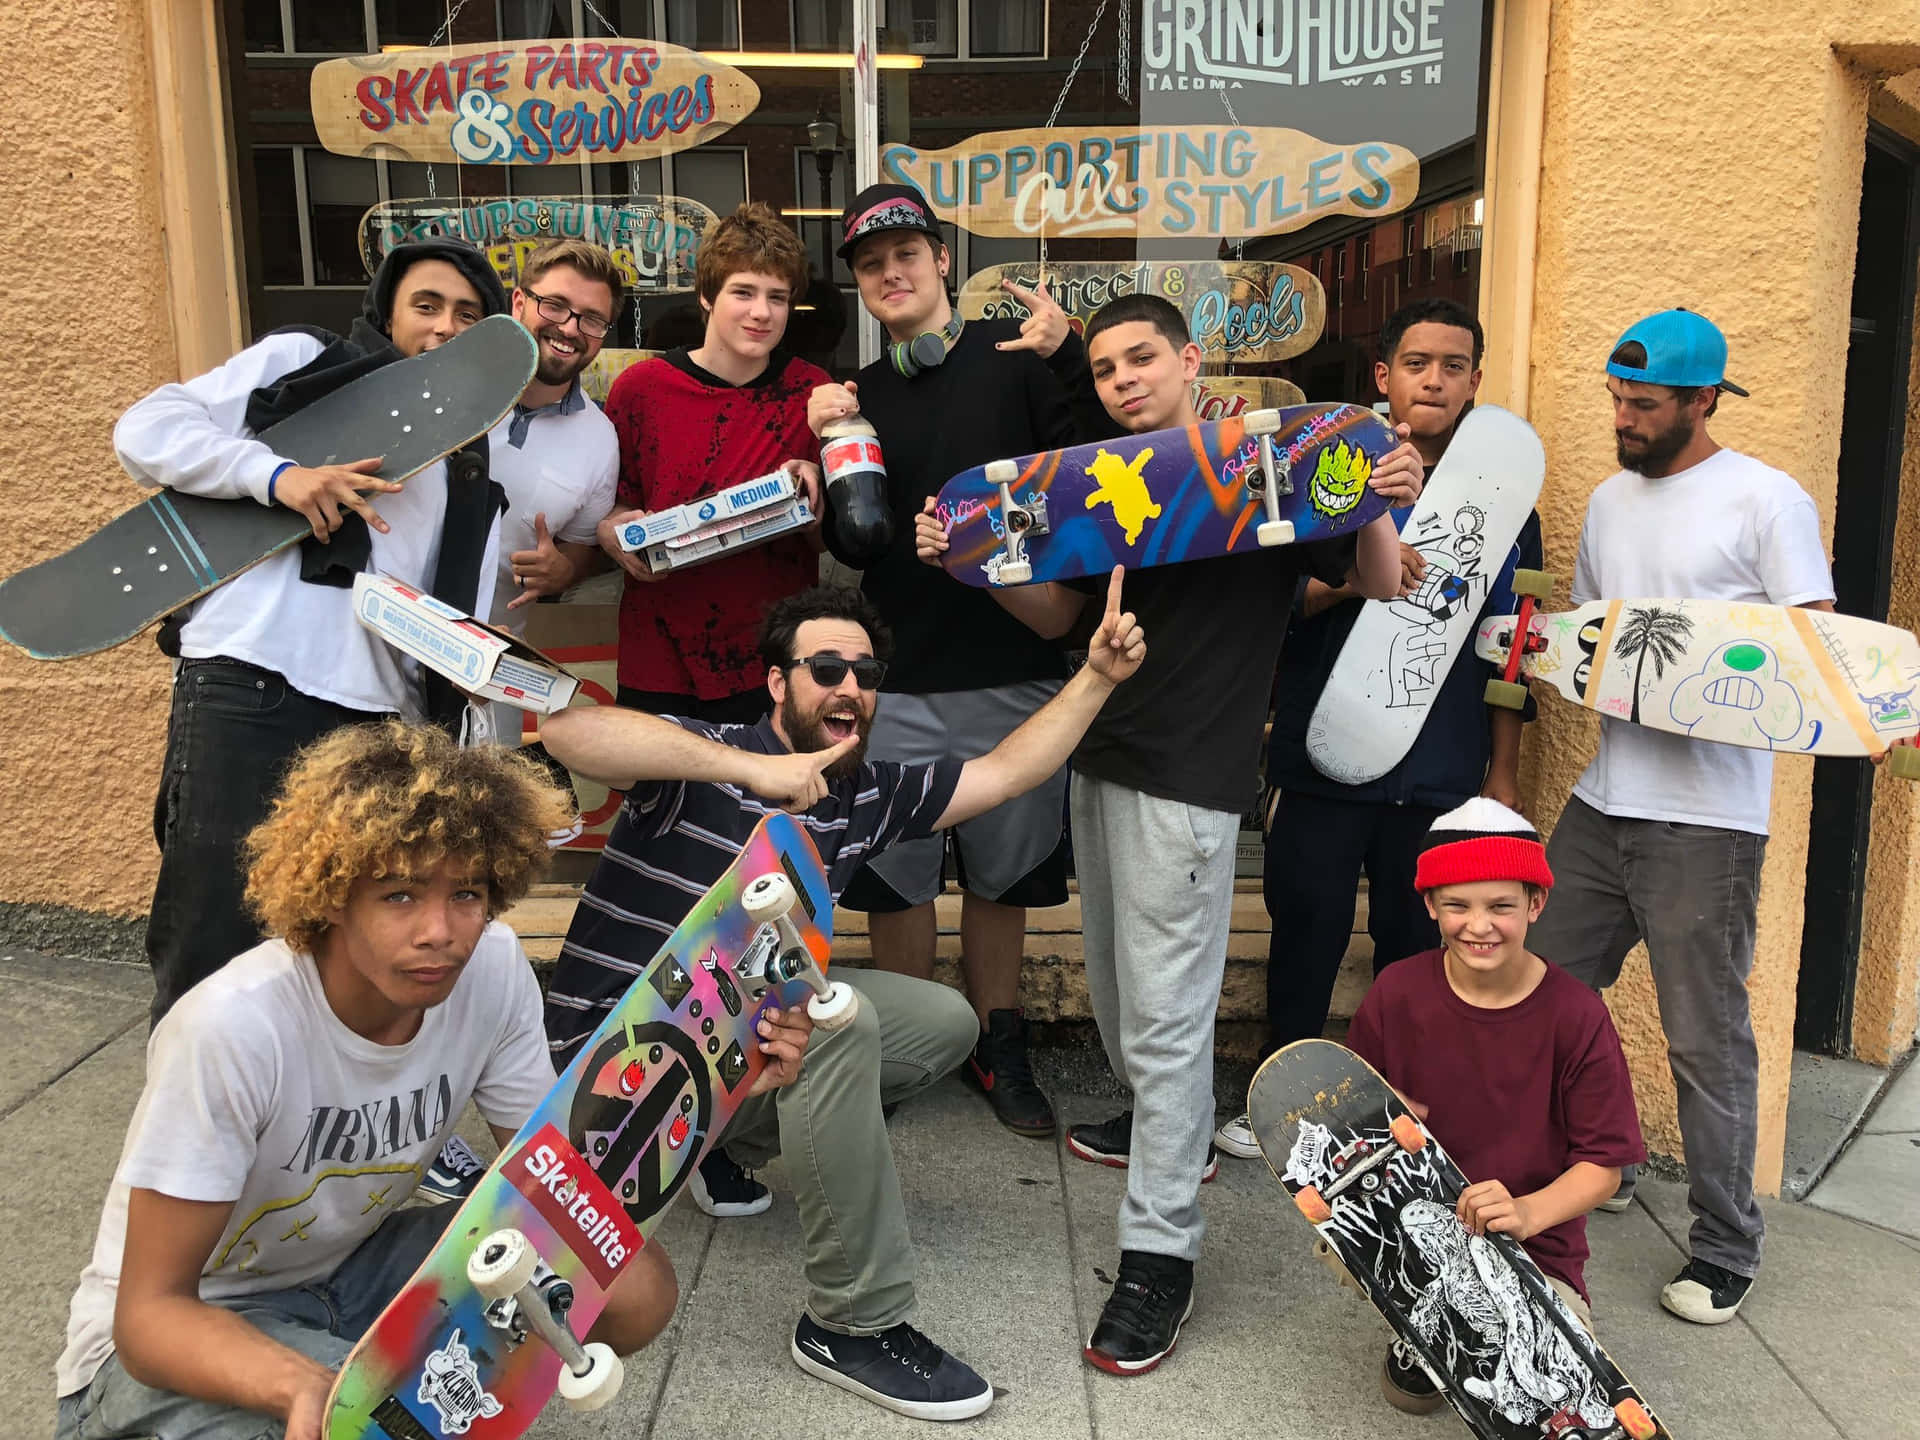 A Group Of People Holding Skateboards